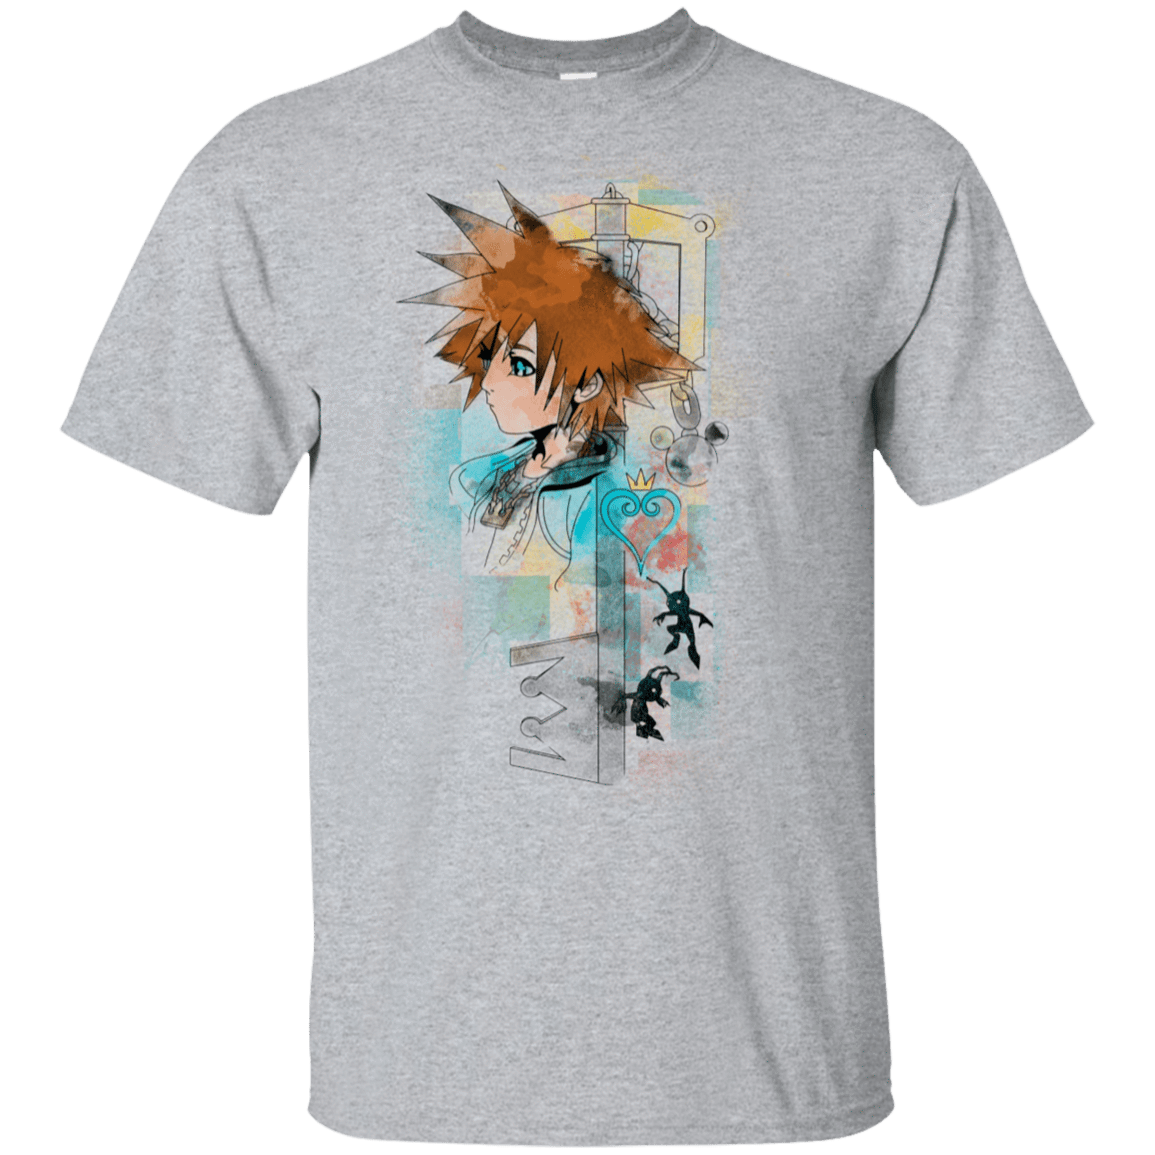 T-Shirts Sport Grey / S Kingdom of Water Colors T-Shirt